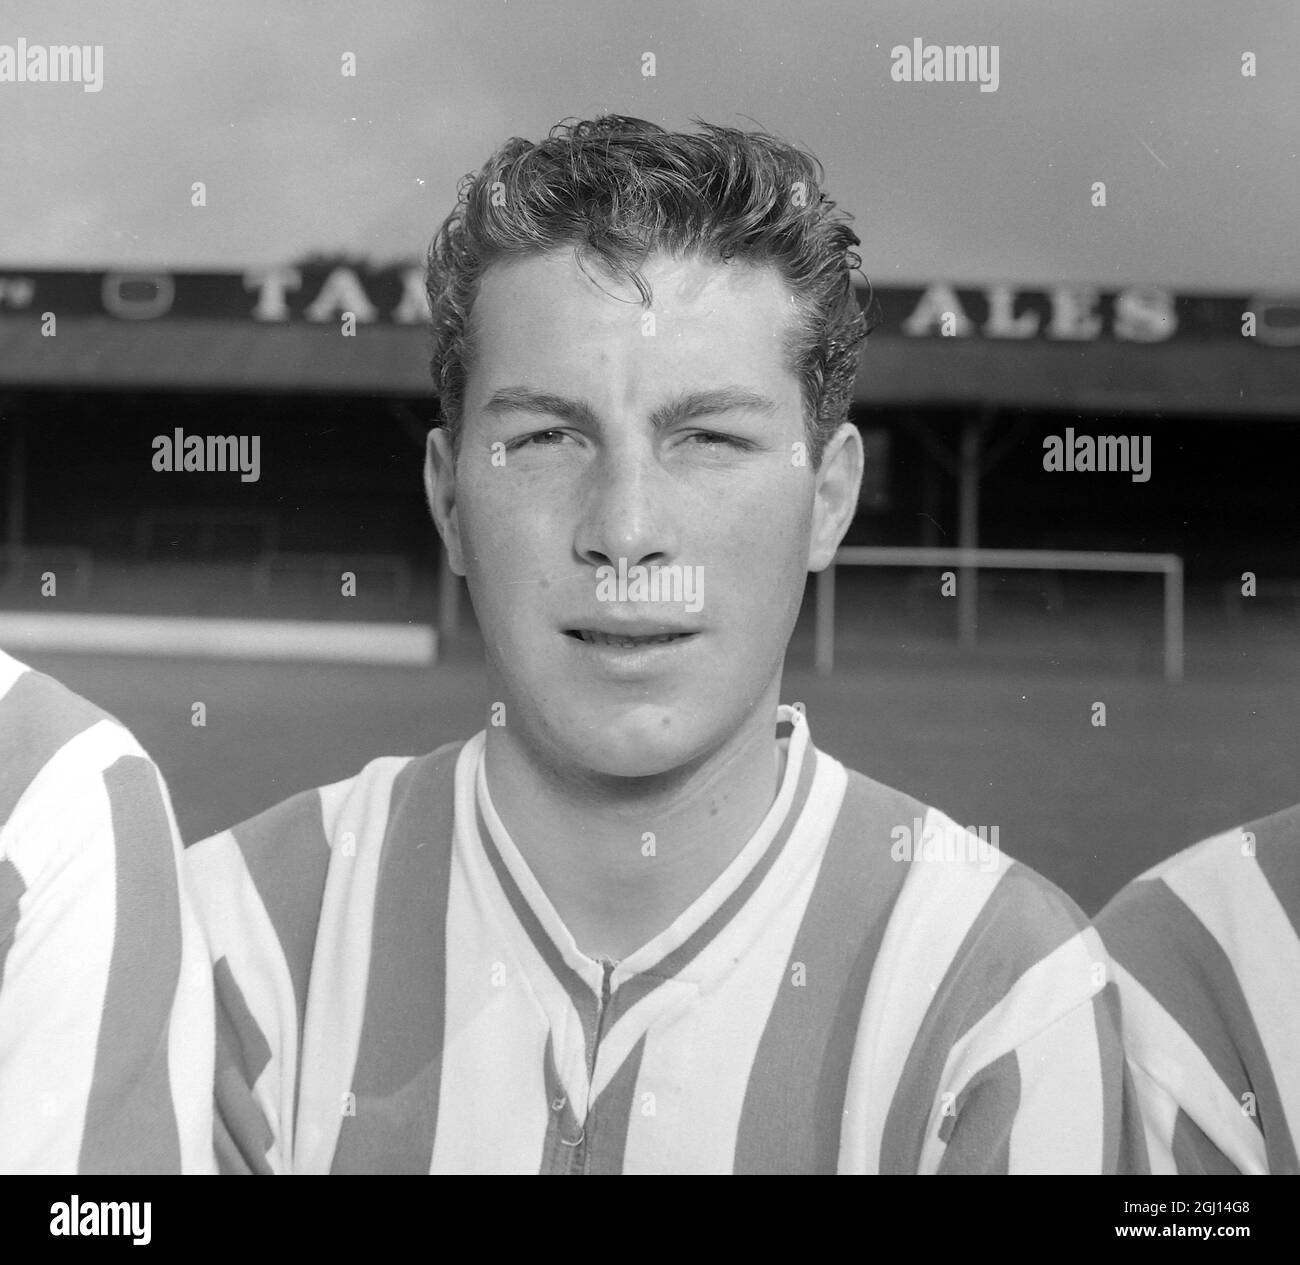 NORMAN GALL - PORTRAIT OF FOOTBALLER, PLAYER OF BRIGHTON & HOVE FC FOOTBALL CLUB TEAM - ; 9 AUGUST 1962 Stock Photo